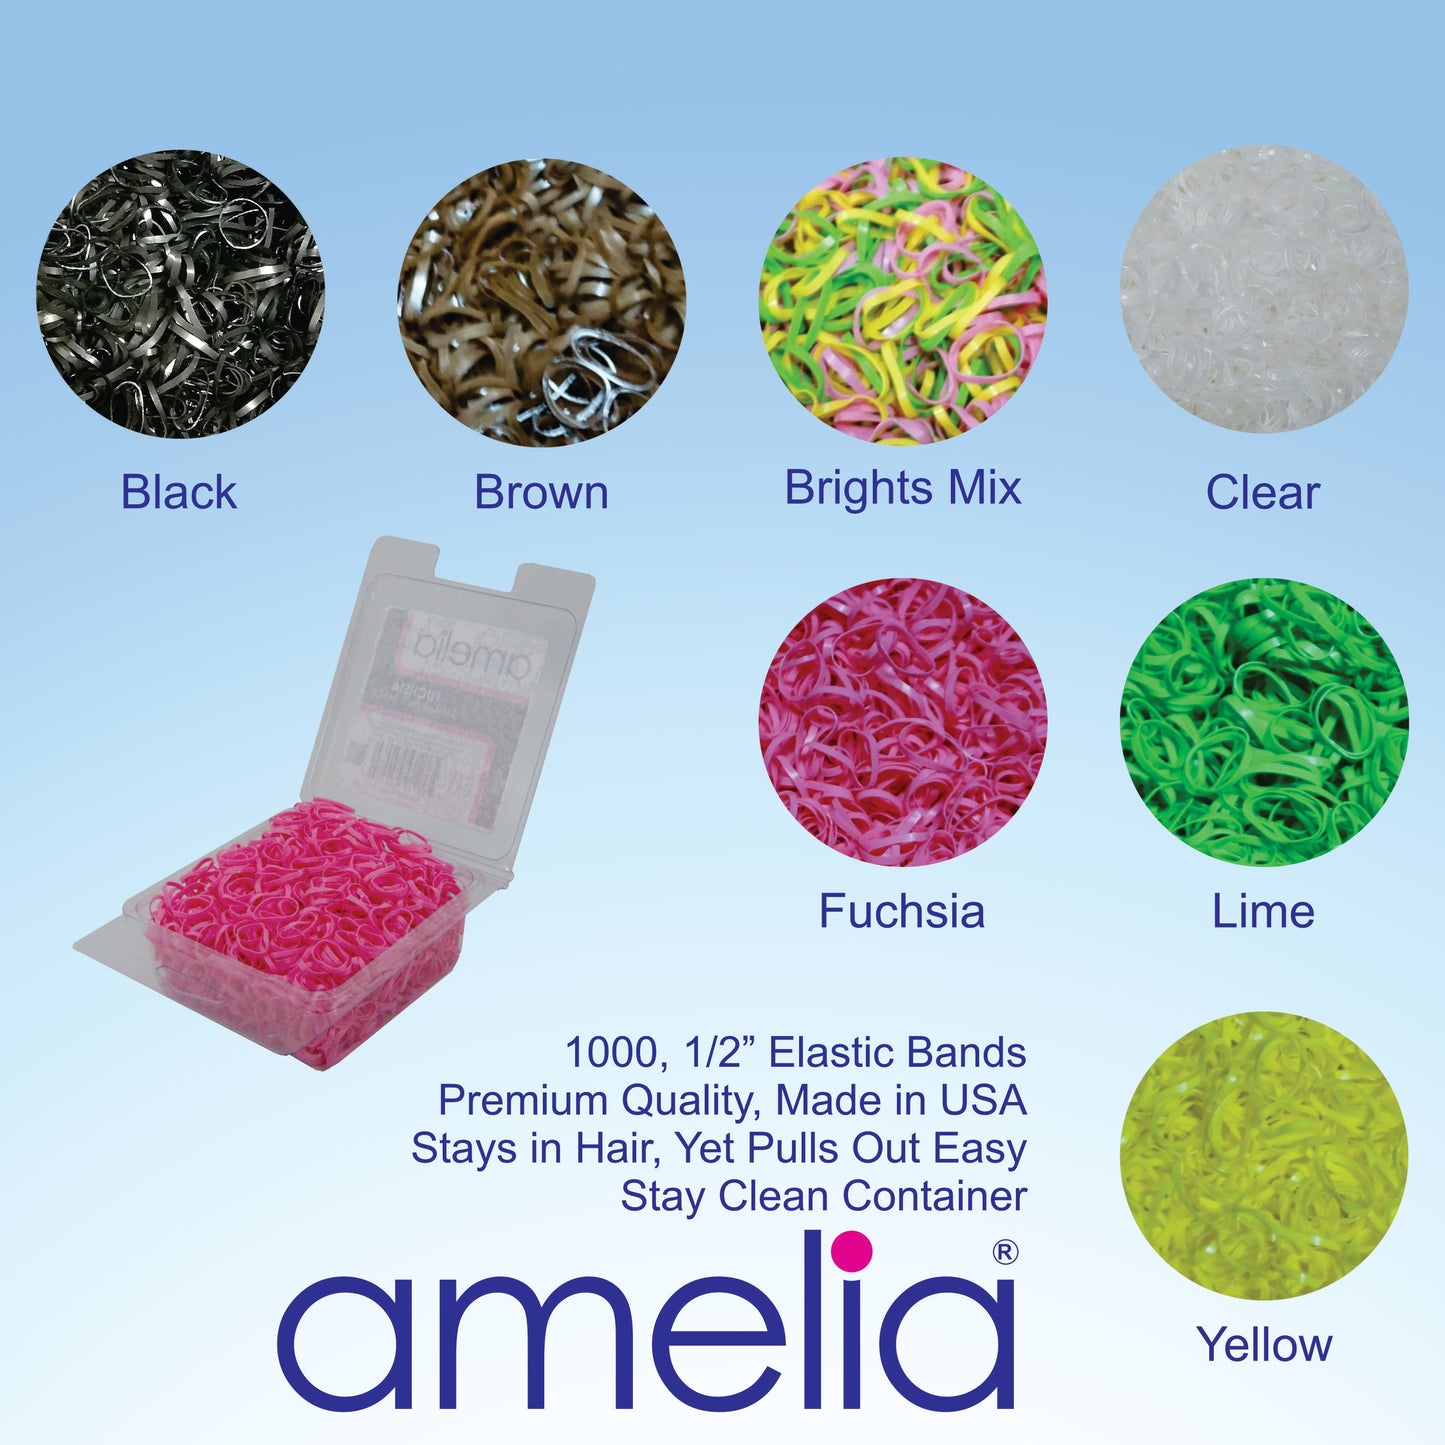 Amelia Beauty | 1/2in, Khaki, Tangle Free Elastic Pony Tail Holders | Made in USA, Ideal for Ponytails, Braids, Twists. For Women, Girls. Pain Free, Snag Free, Easy Off | 1000 Pack - 12 Retail Packs